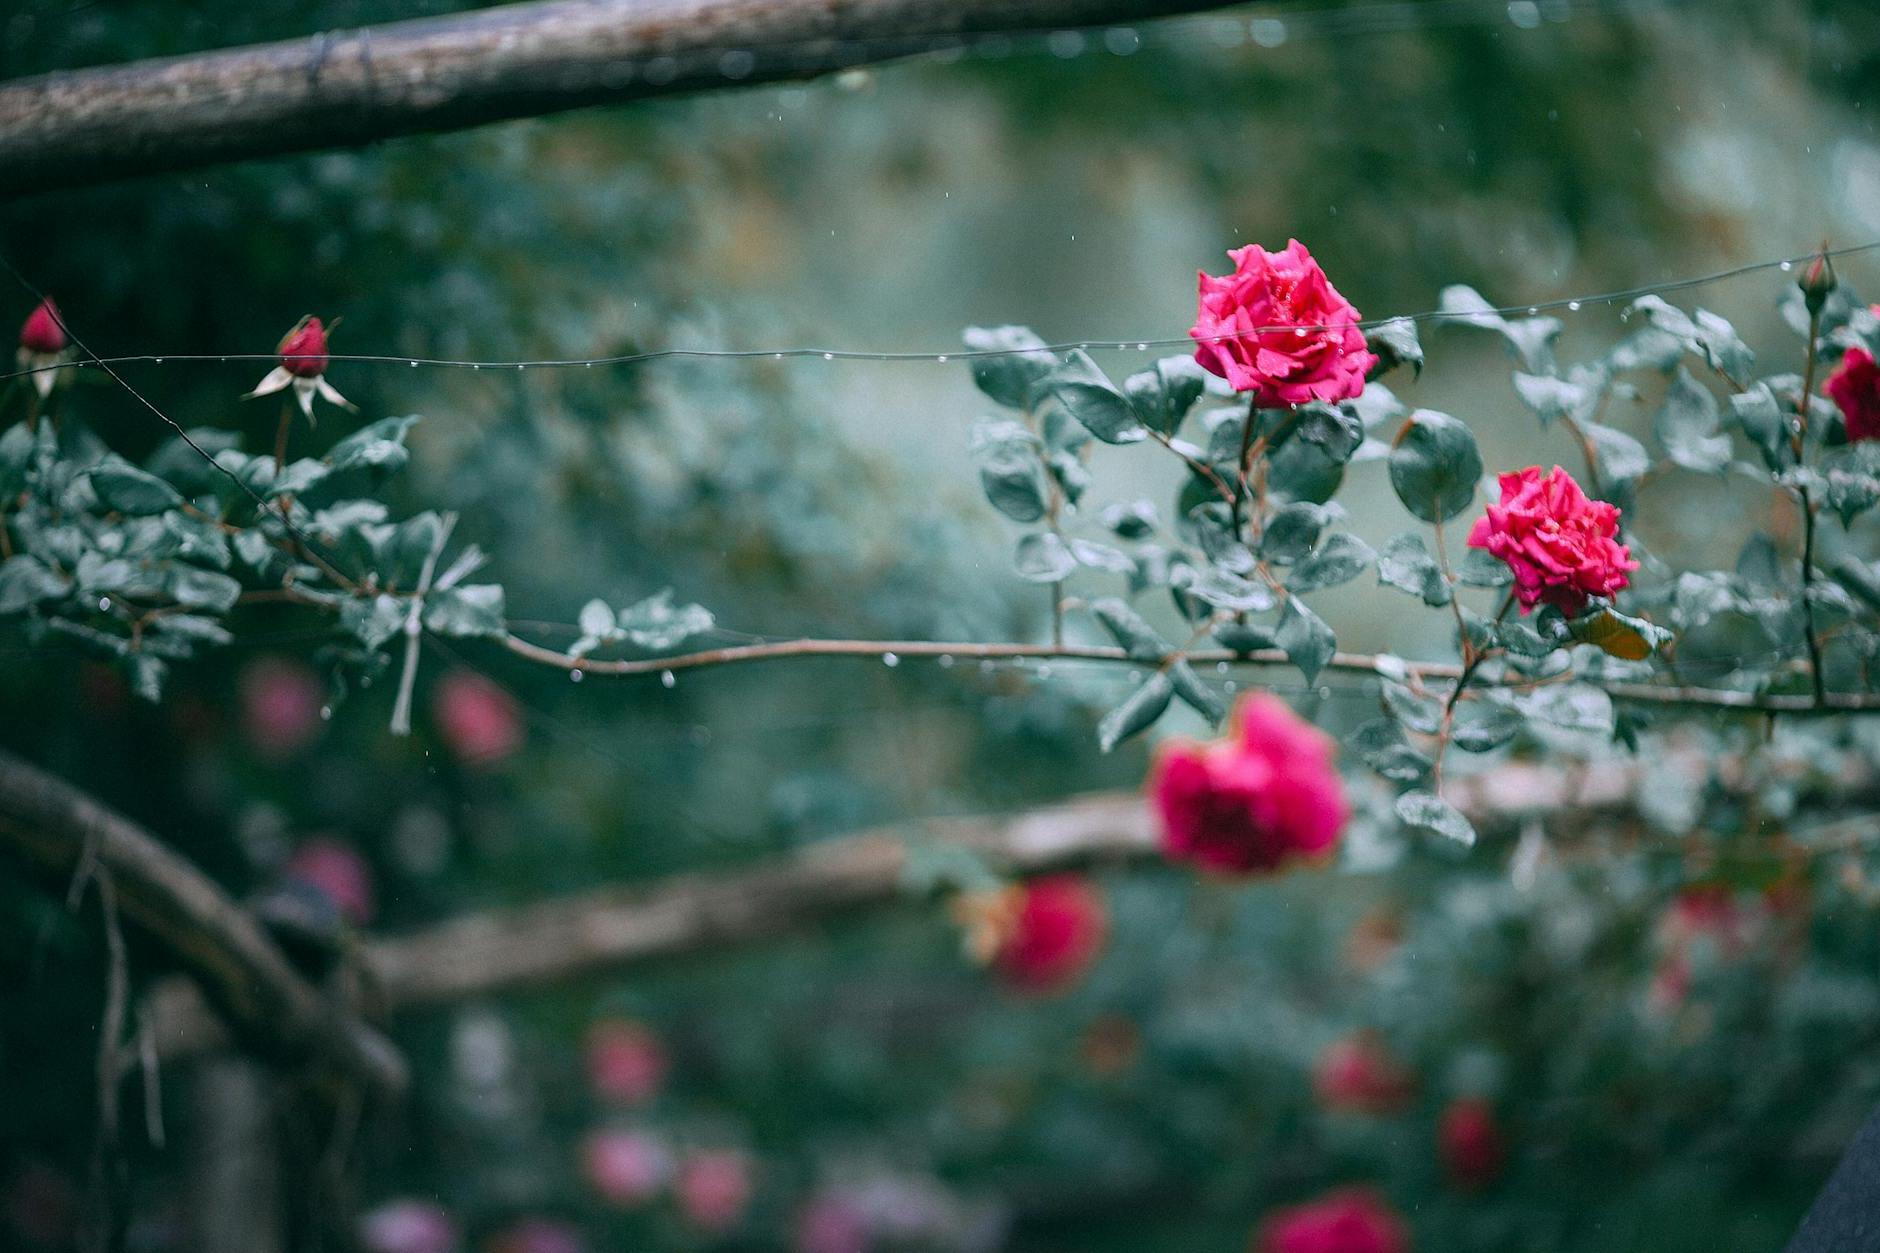 Green bushes with blooming roses and rose buds in summer garden on blurred background